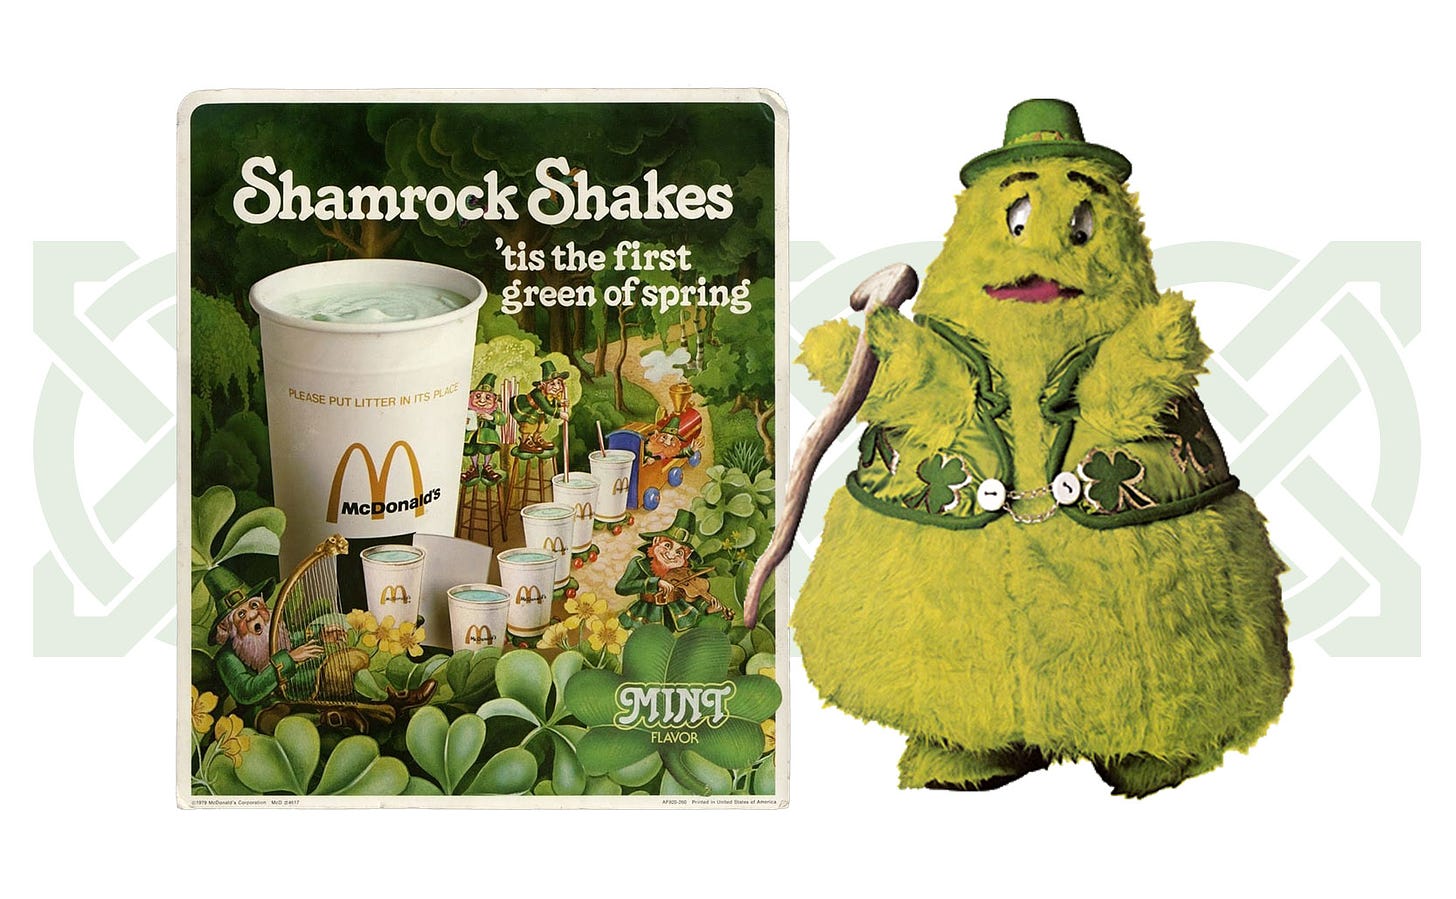 an old ad for shamrock shakes plus an image of uncle o'grimacey, which is basically a green version of grimace wearing a hat, shamrock covered vest, and with a wooden staff